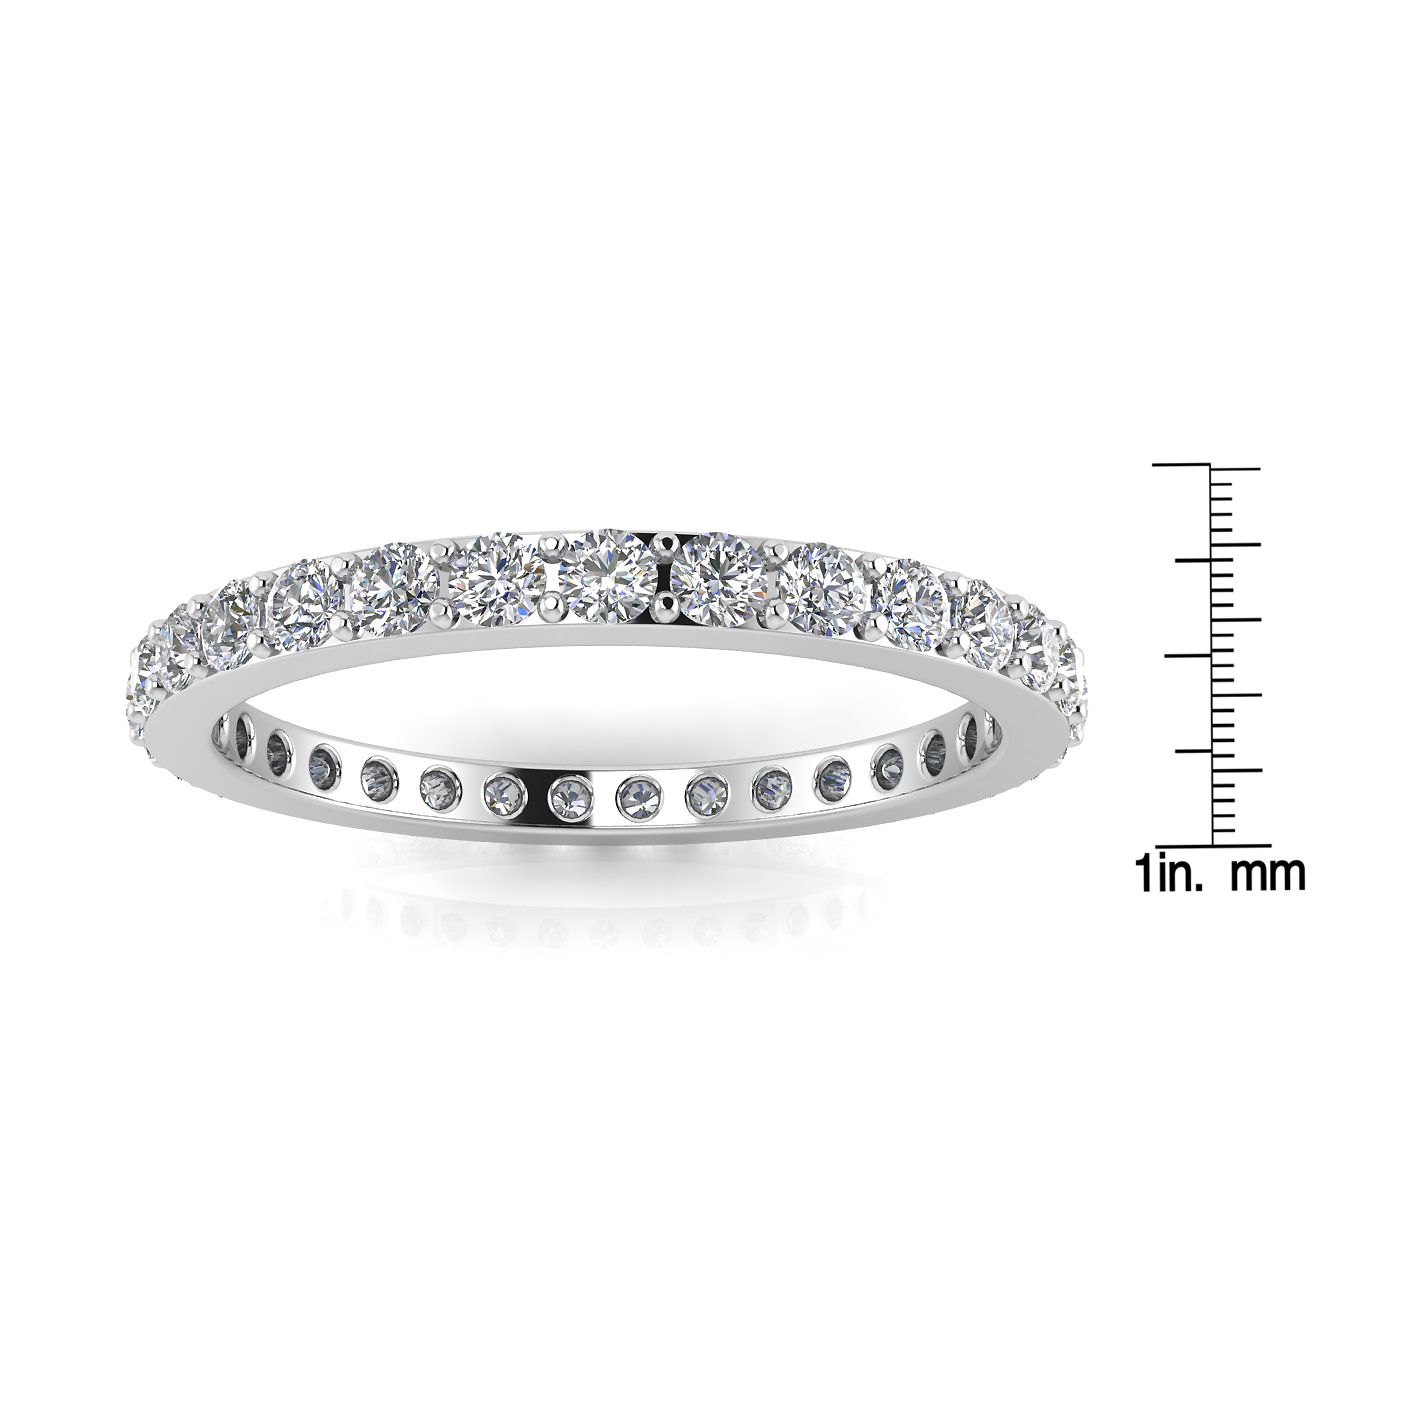 Round Brilliant Cut Diamond Pave Set Eternity Ring In 14k White Gold  (1.49ct. Tw.) Ring Size 7